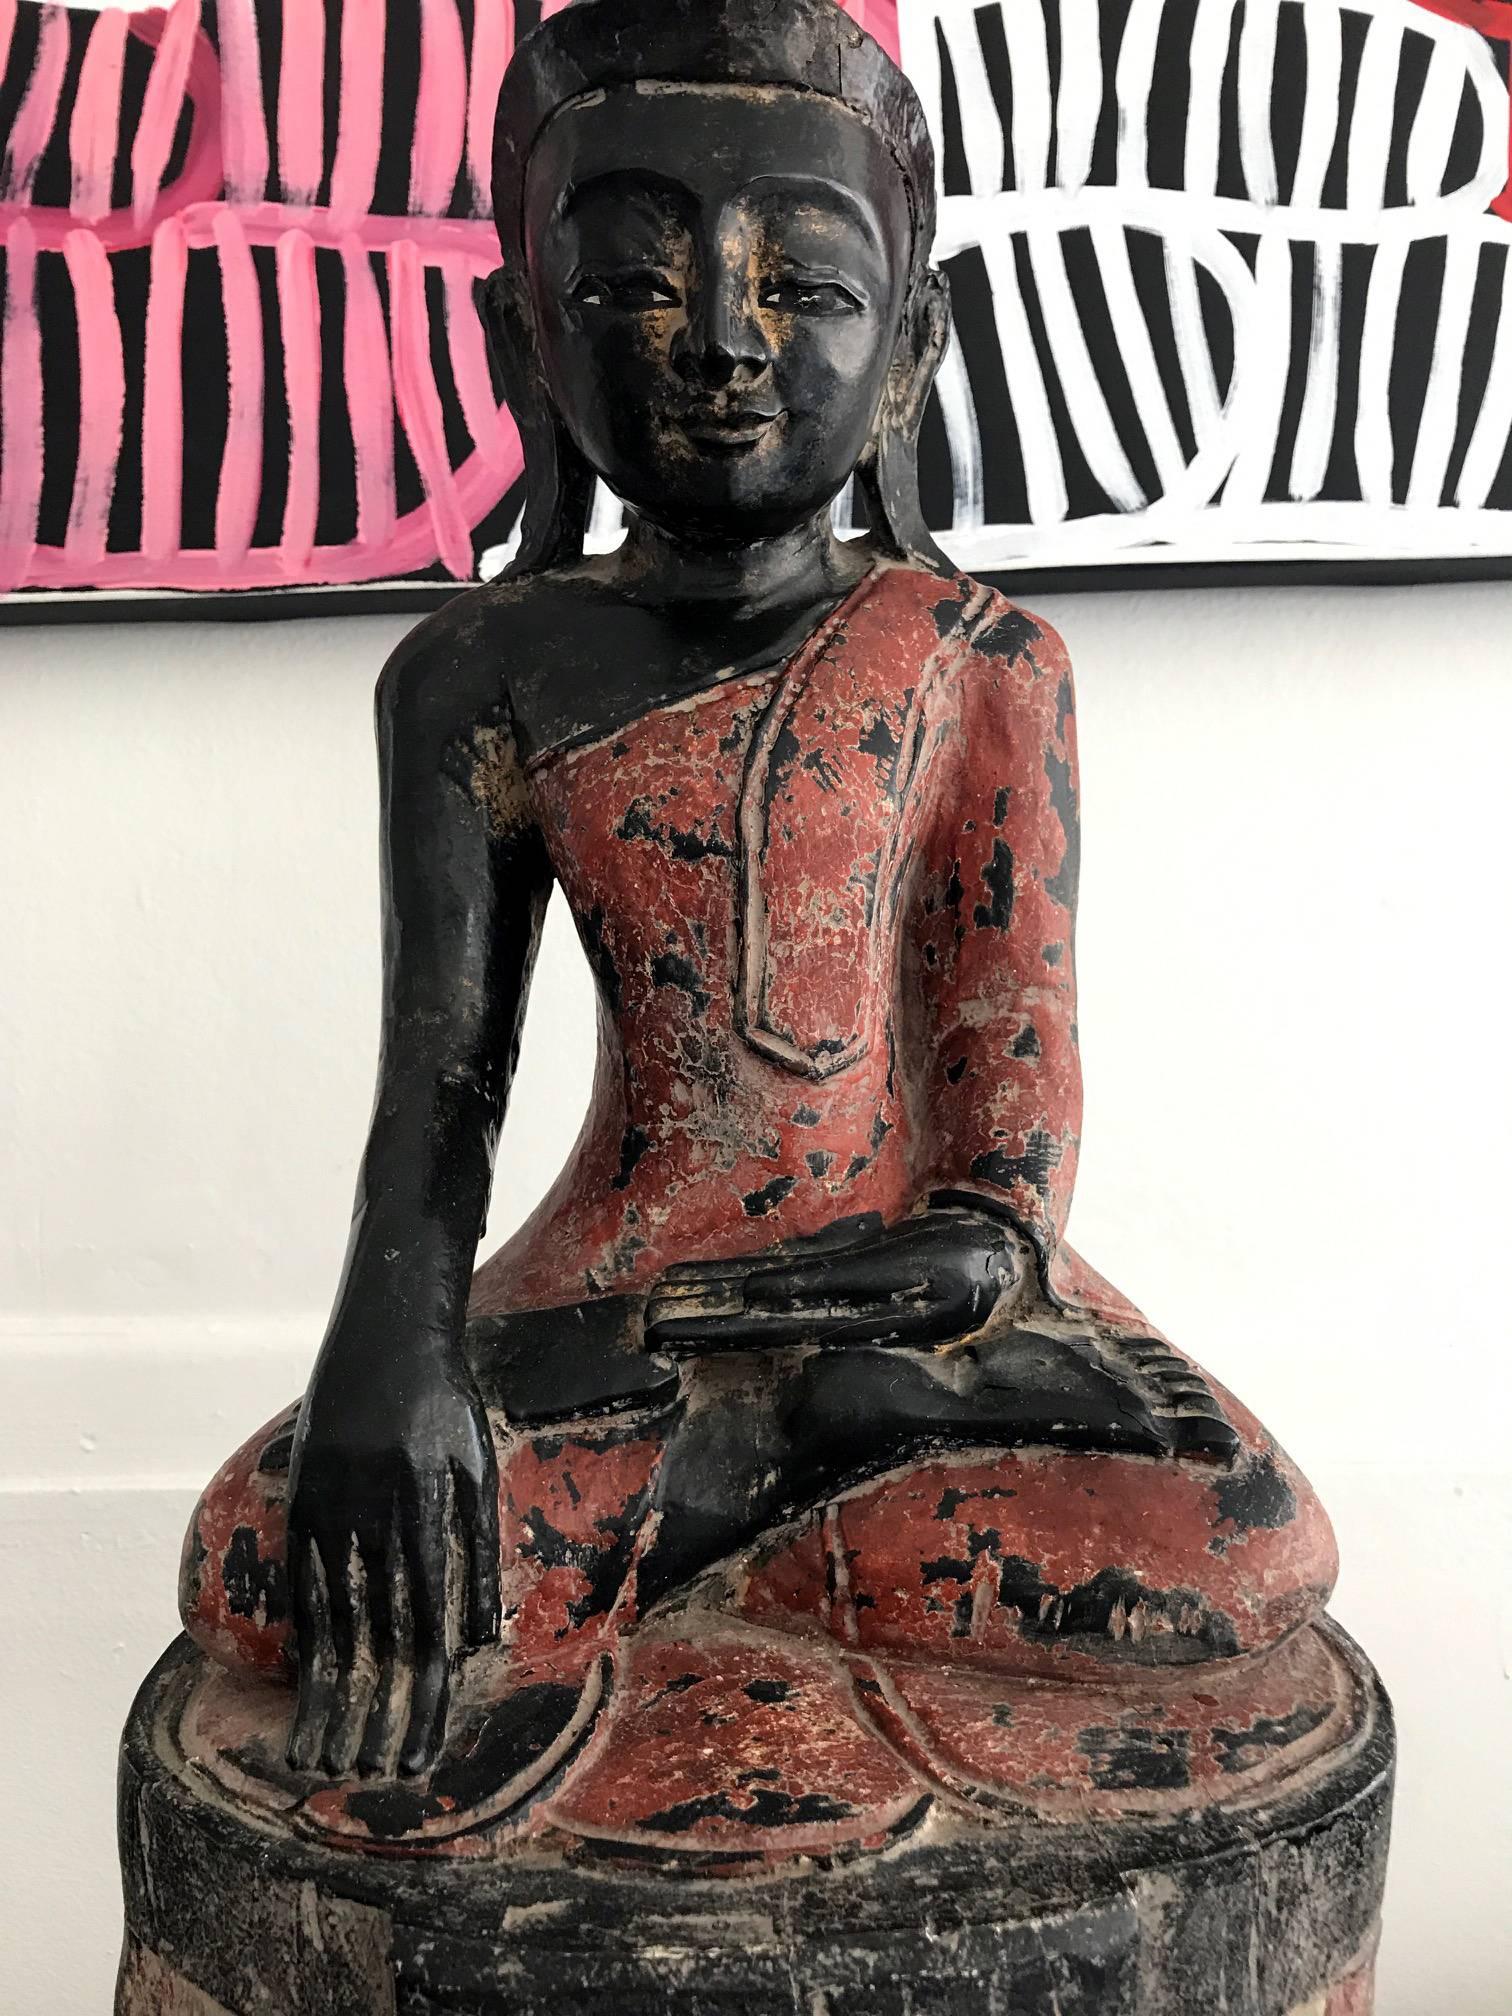 On offer is a craved wood polychromed Buddha from Burma, Southeast Asia, circa 19th century. The Buddha is seated on an unusual double-lotus throne in an 